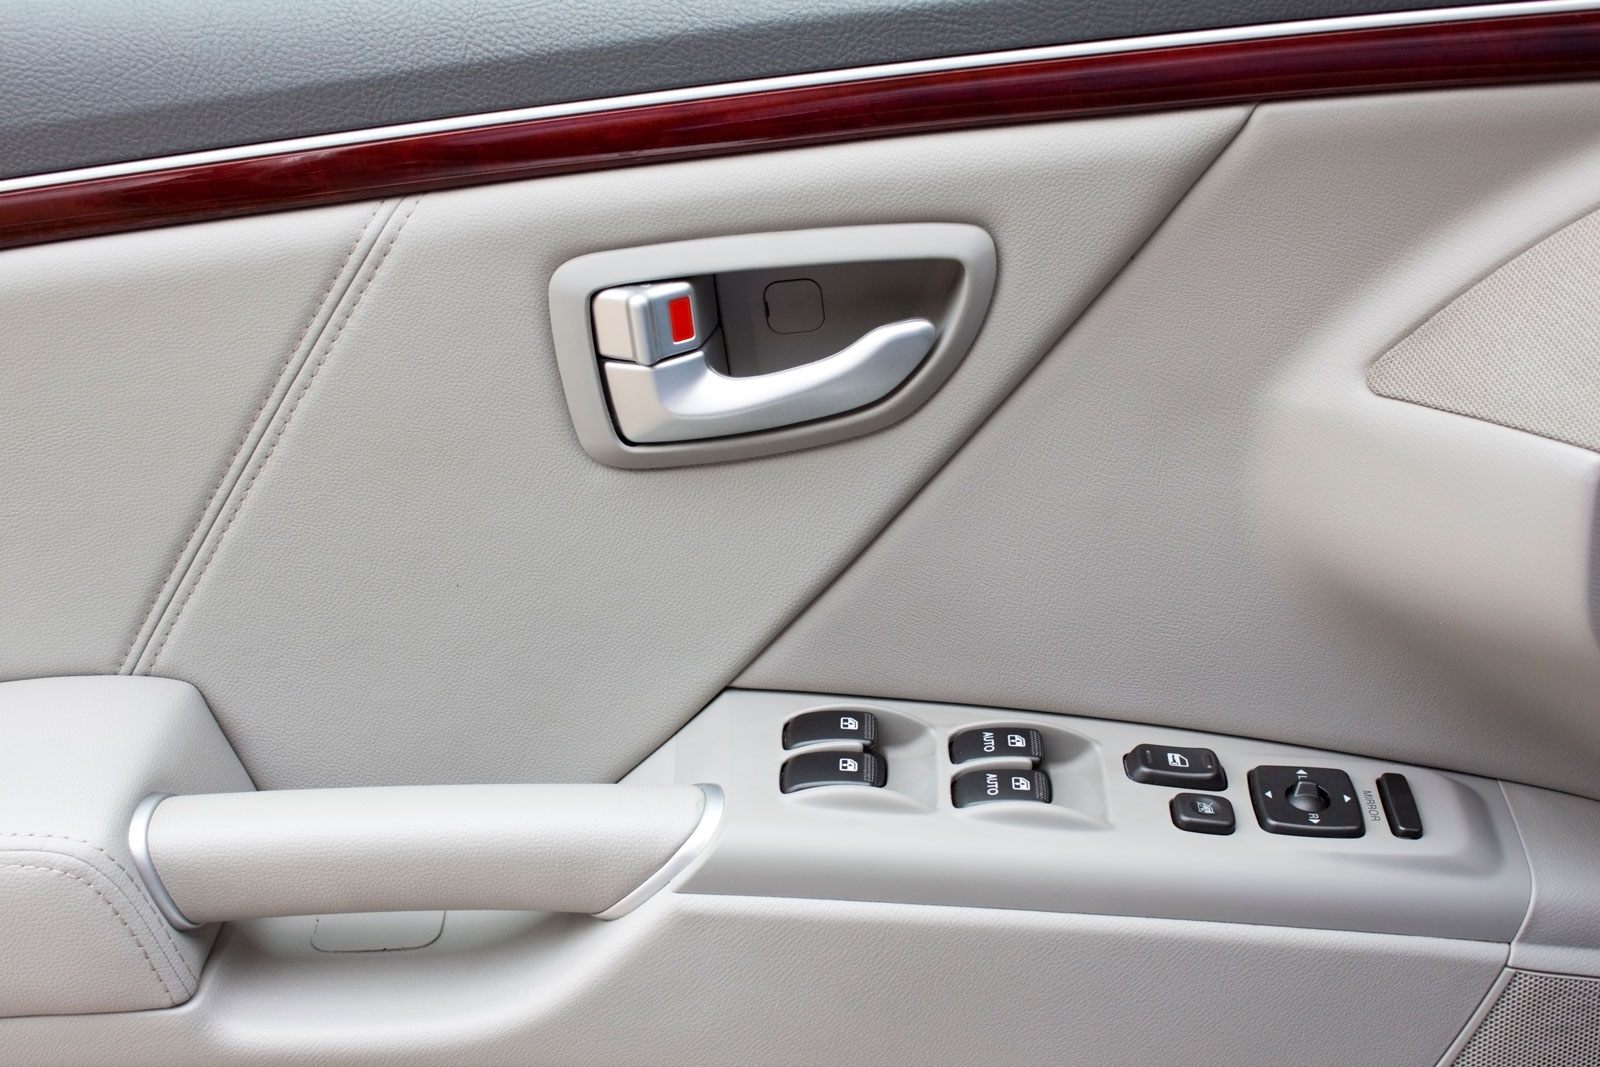 image of buttons on car door